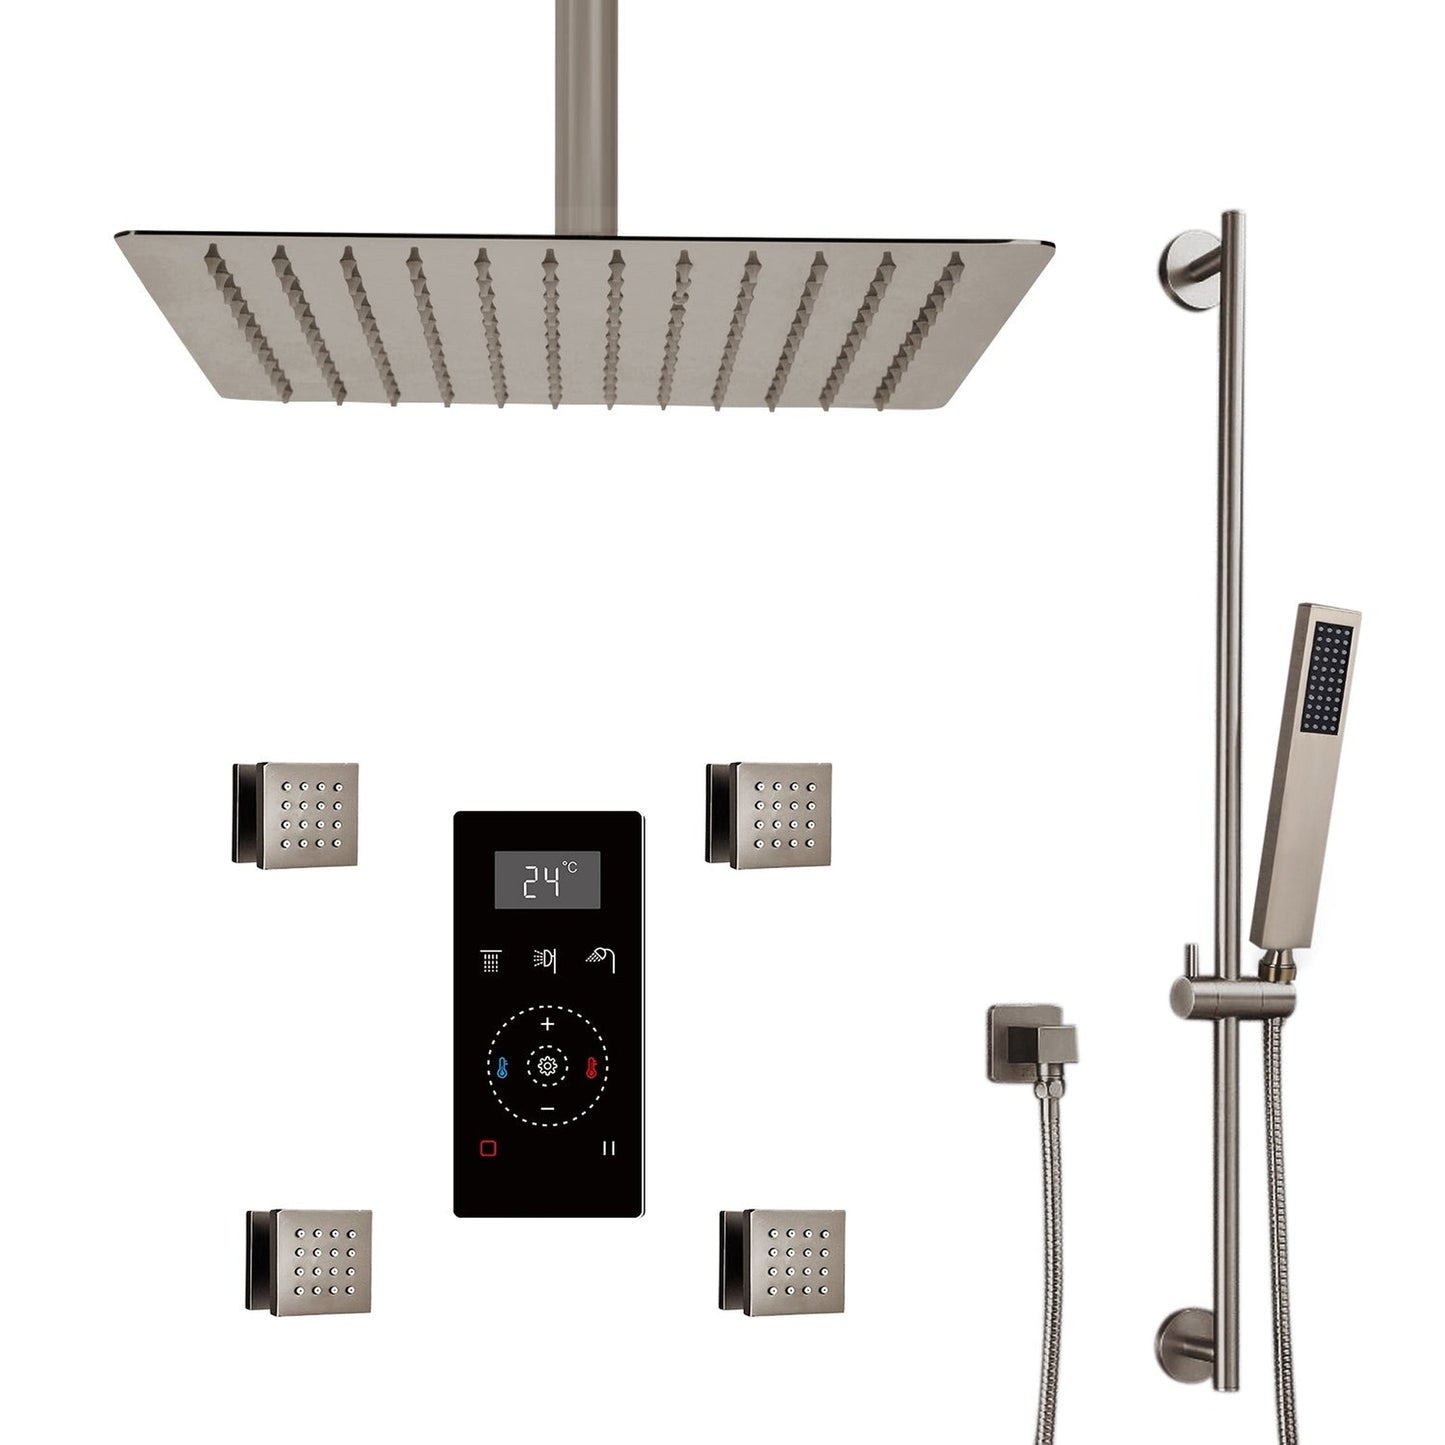 Fontana 20" Brushed Nickel Ceiling Mounted Rainfall Digital Thermostat Mixer Shower System With 4-Jet Body Spray, Hand Shower and Water Powered LED Lights